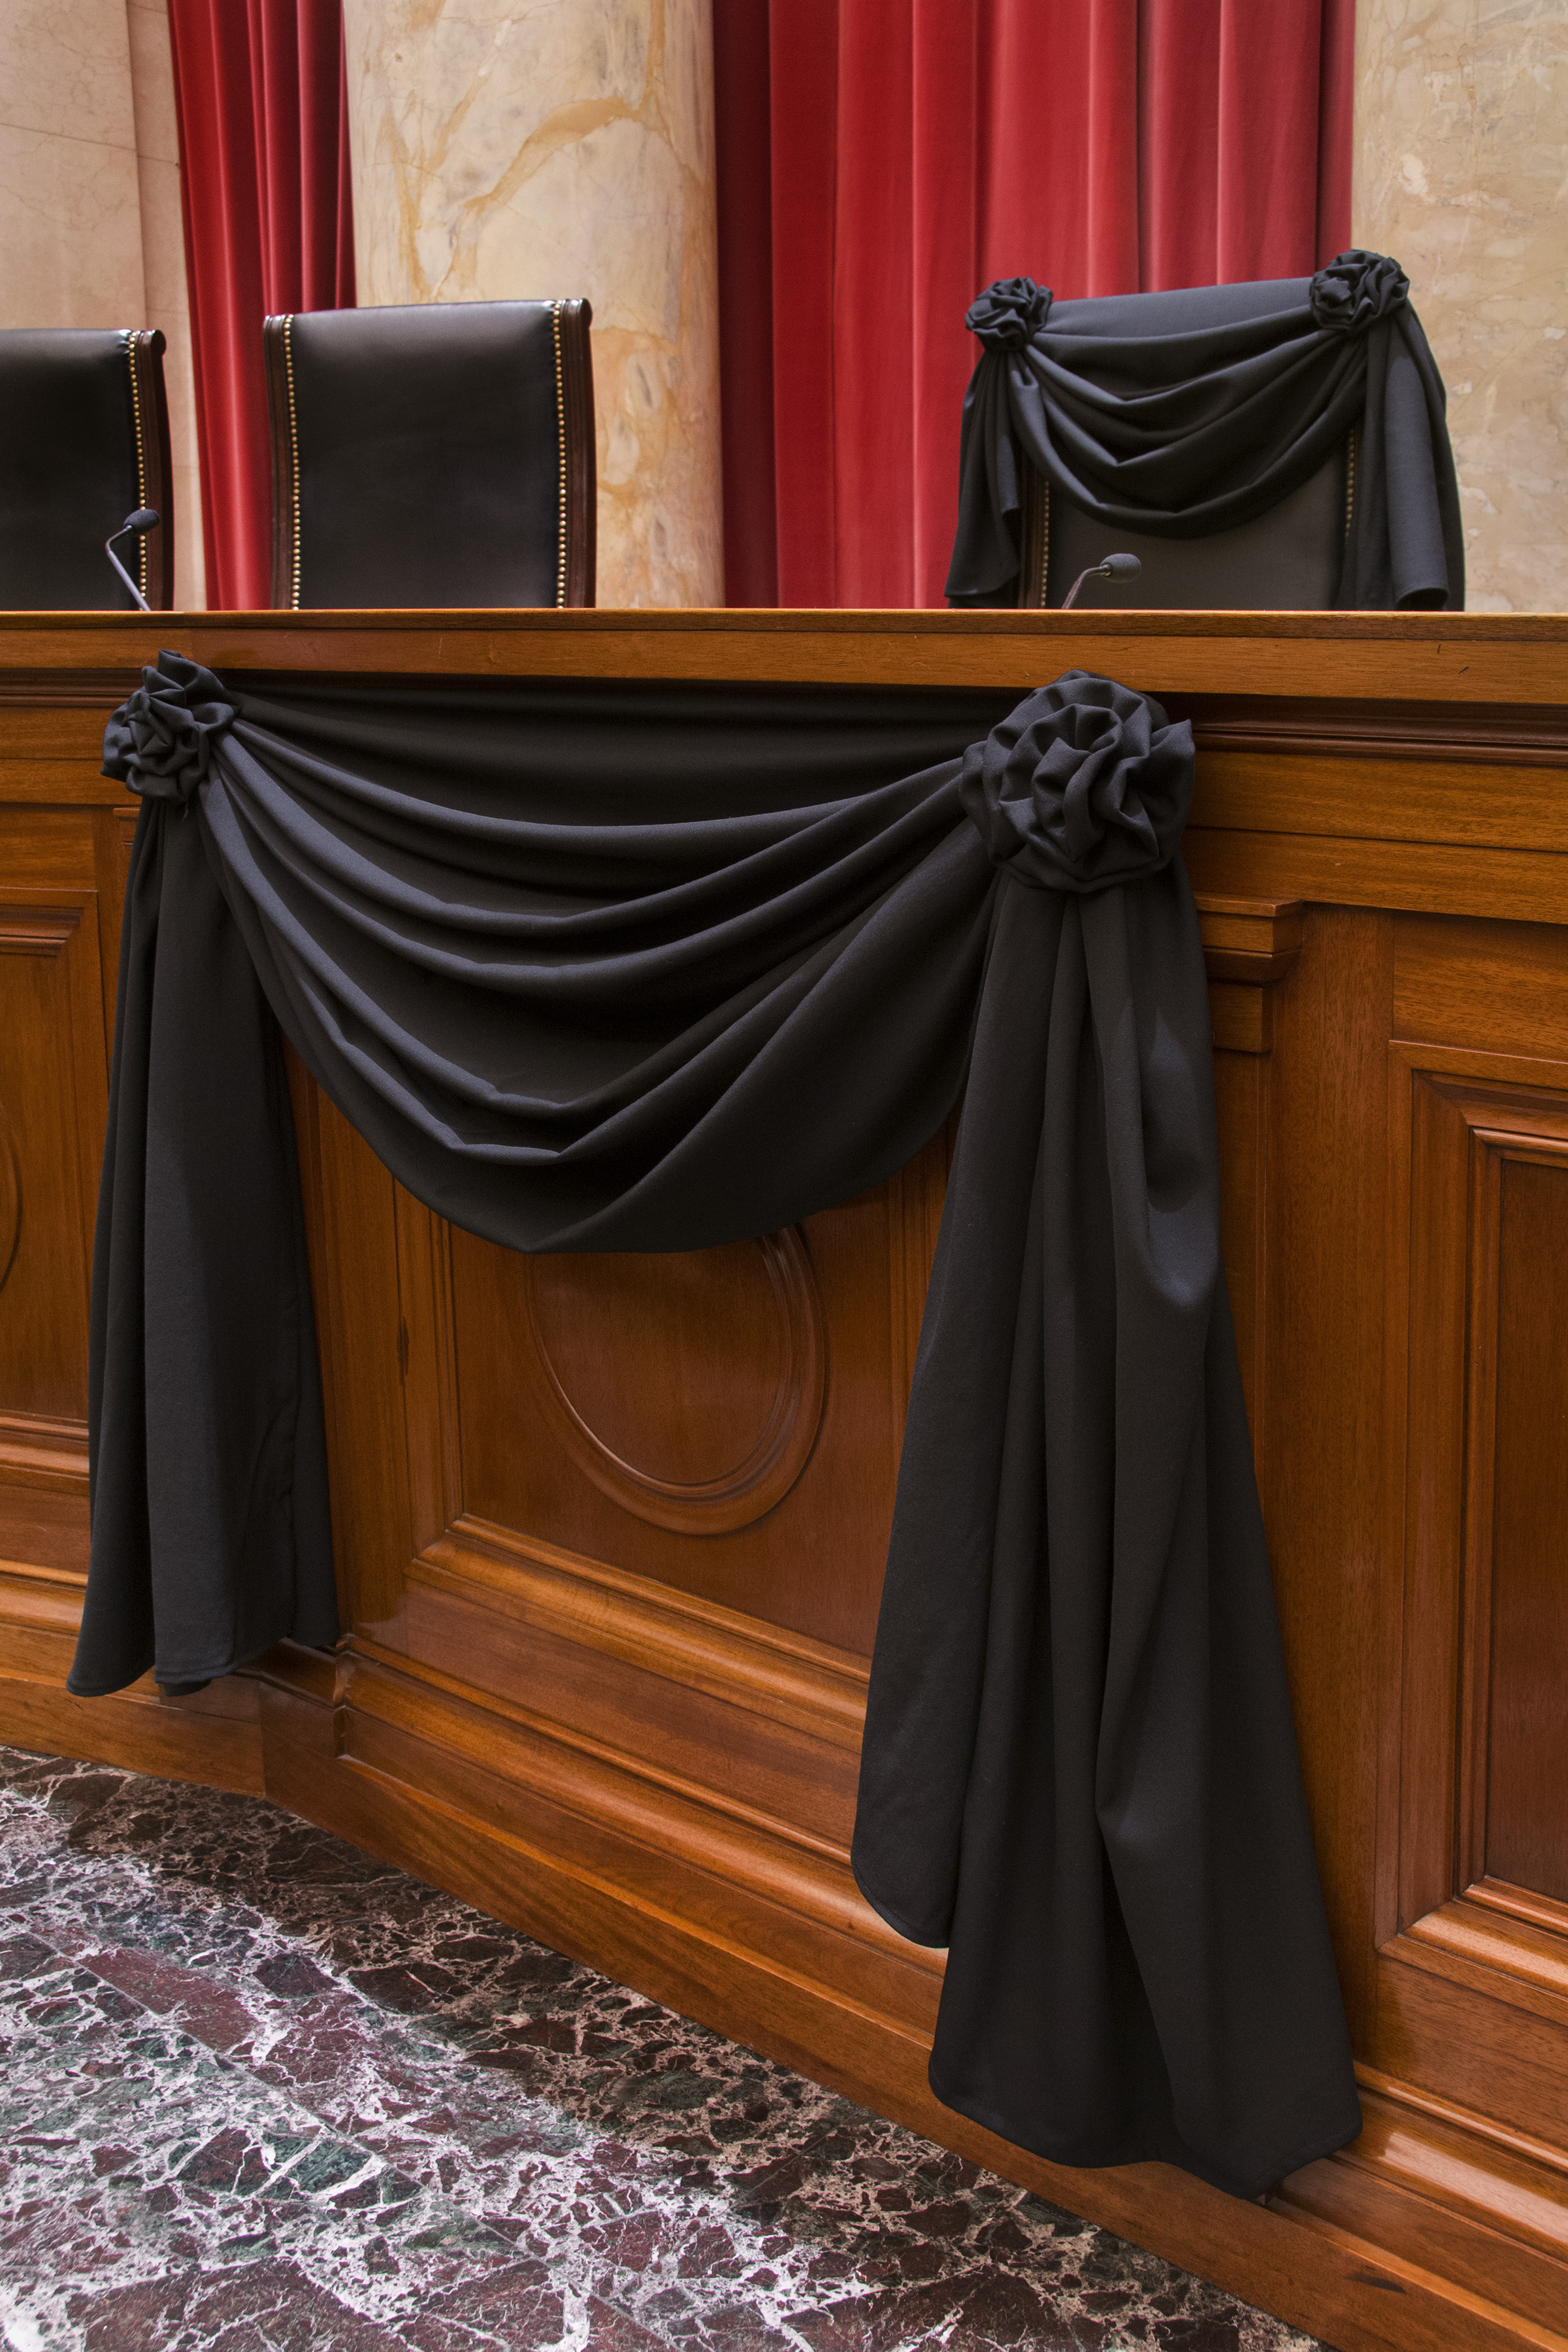 Associate Justice Antonin Scalia’s bench chair and the bench in front of his seat are draped in black in the Courtroom of the Supreme Court following his Feb. 13, 2016 death.